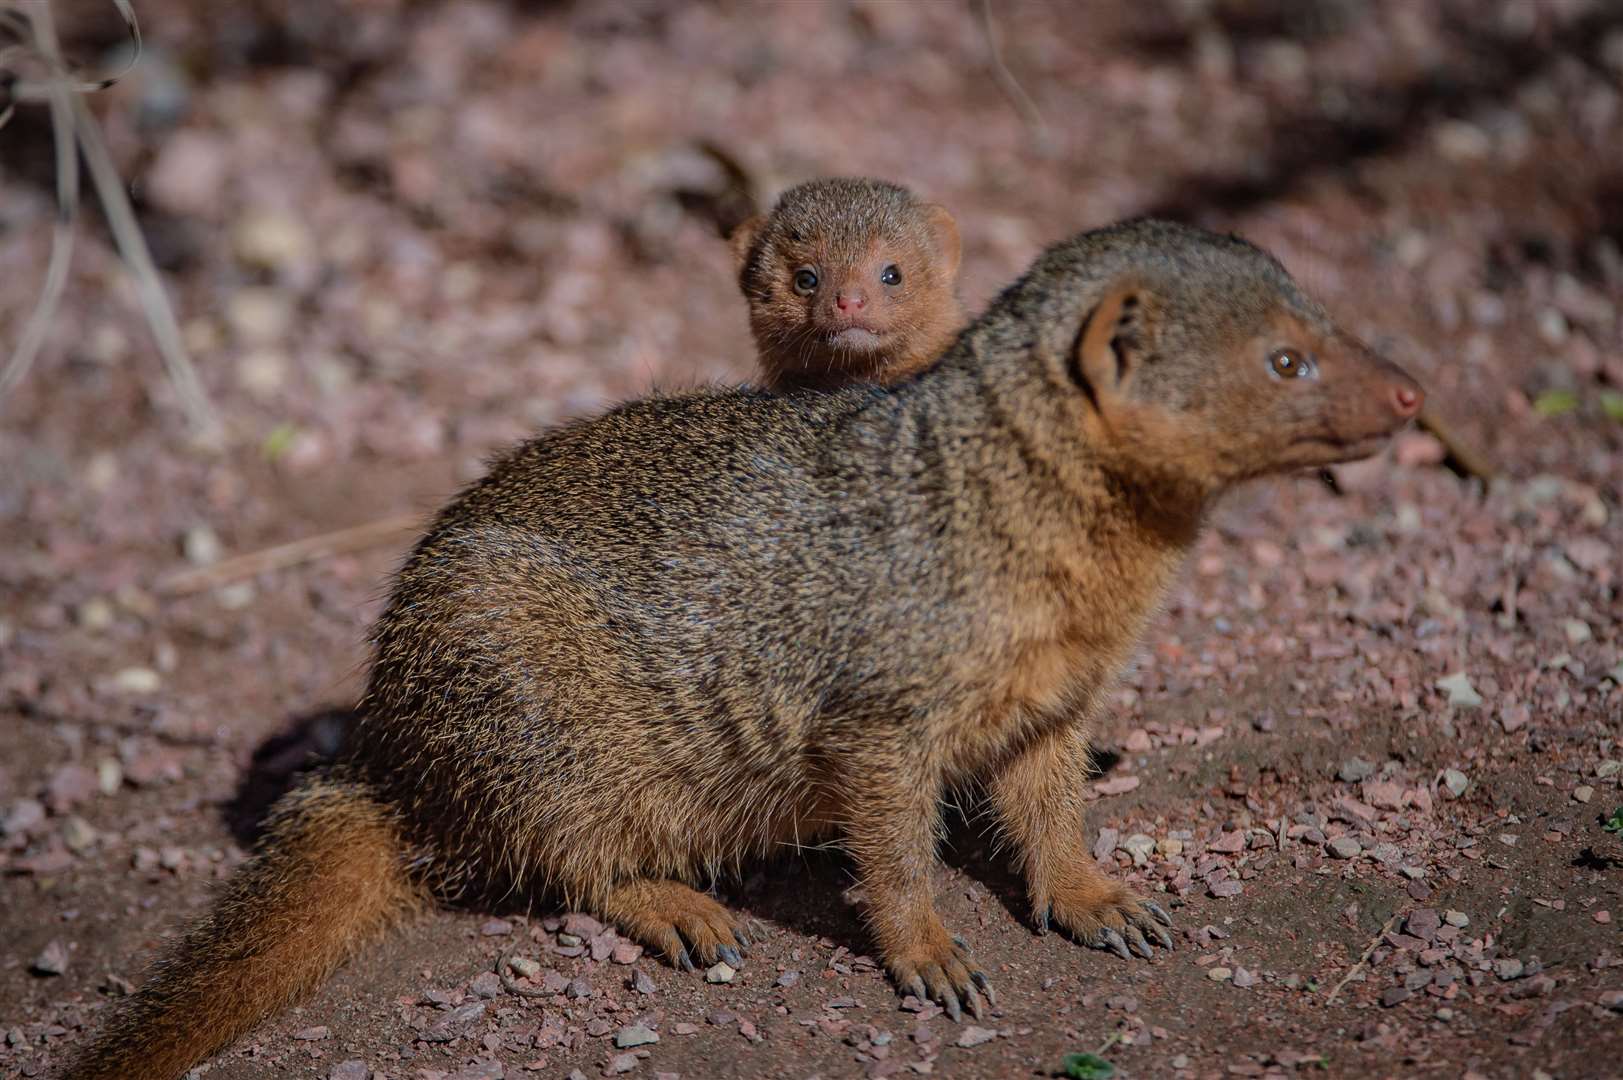 Dwarf mongooses are the smallest carnivores found in Africa (Chester Zoo)